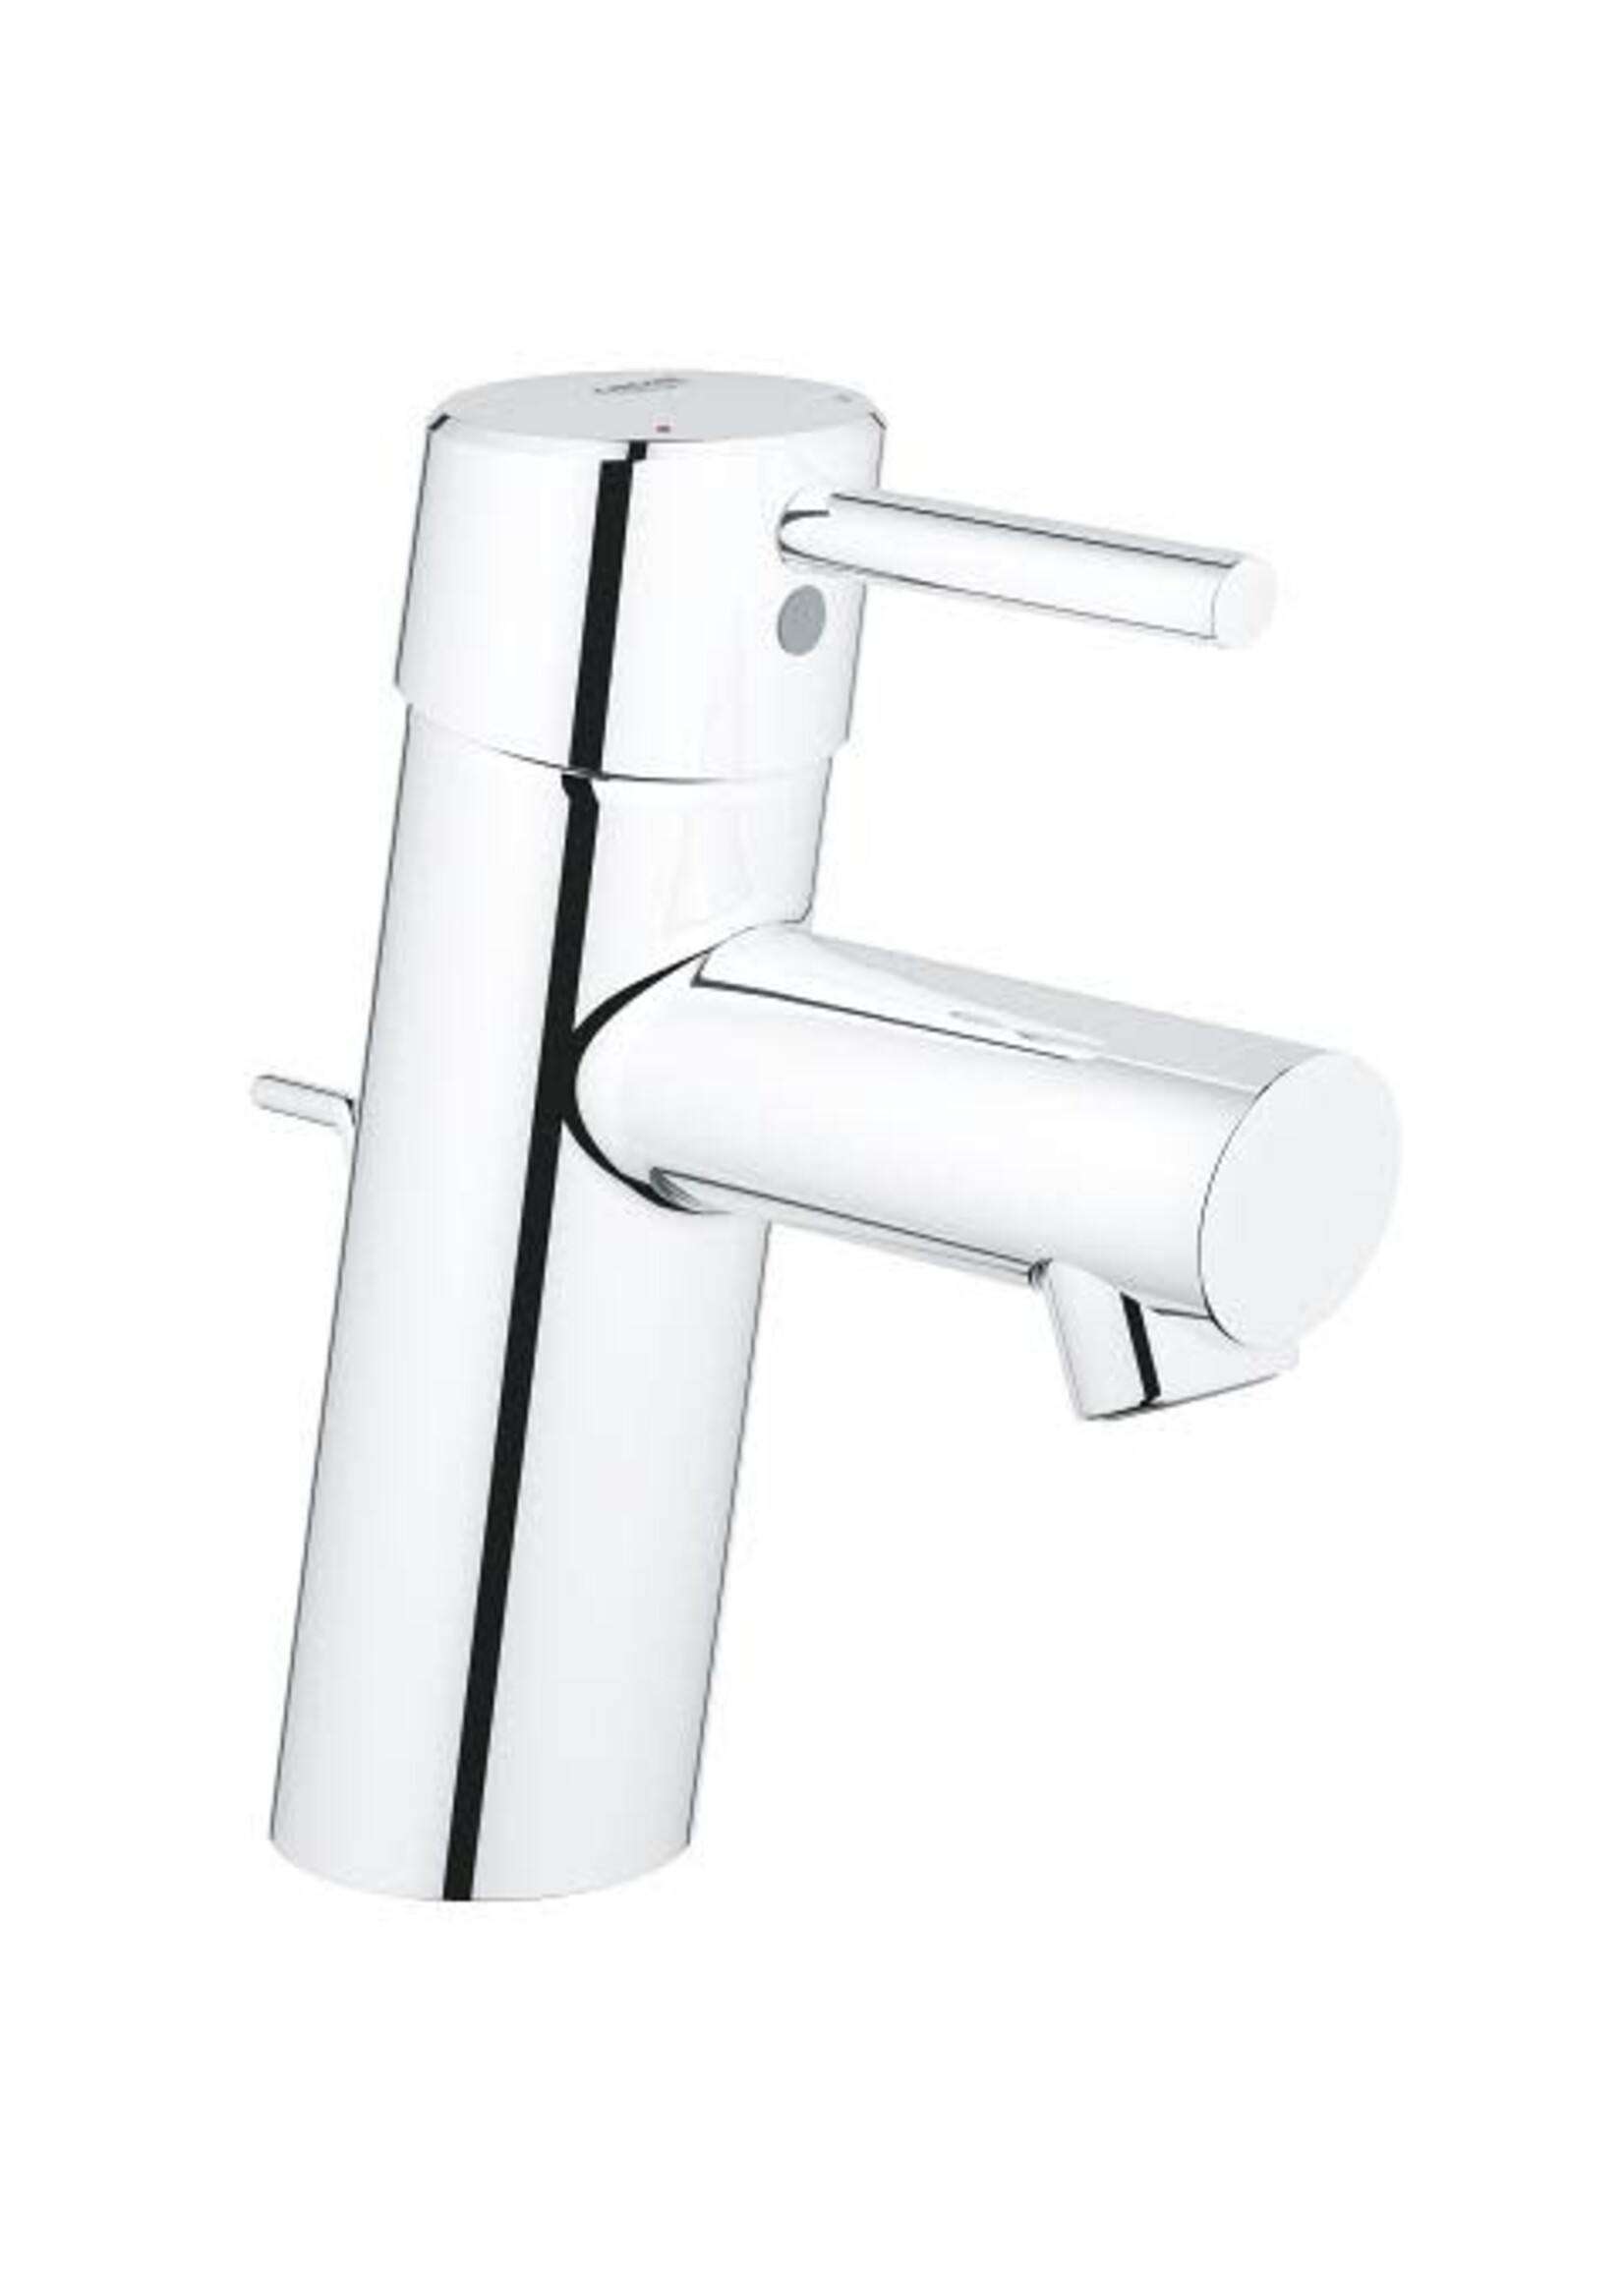 Grohe Grohe Concetto Single Handle  Less Drain Chrome